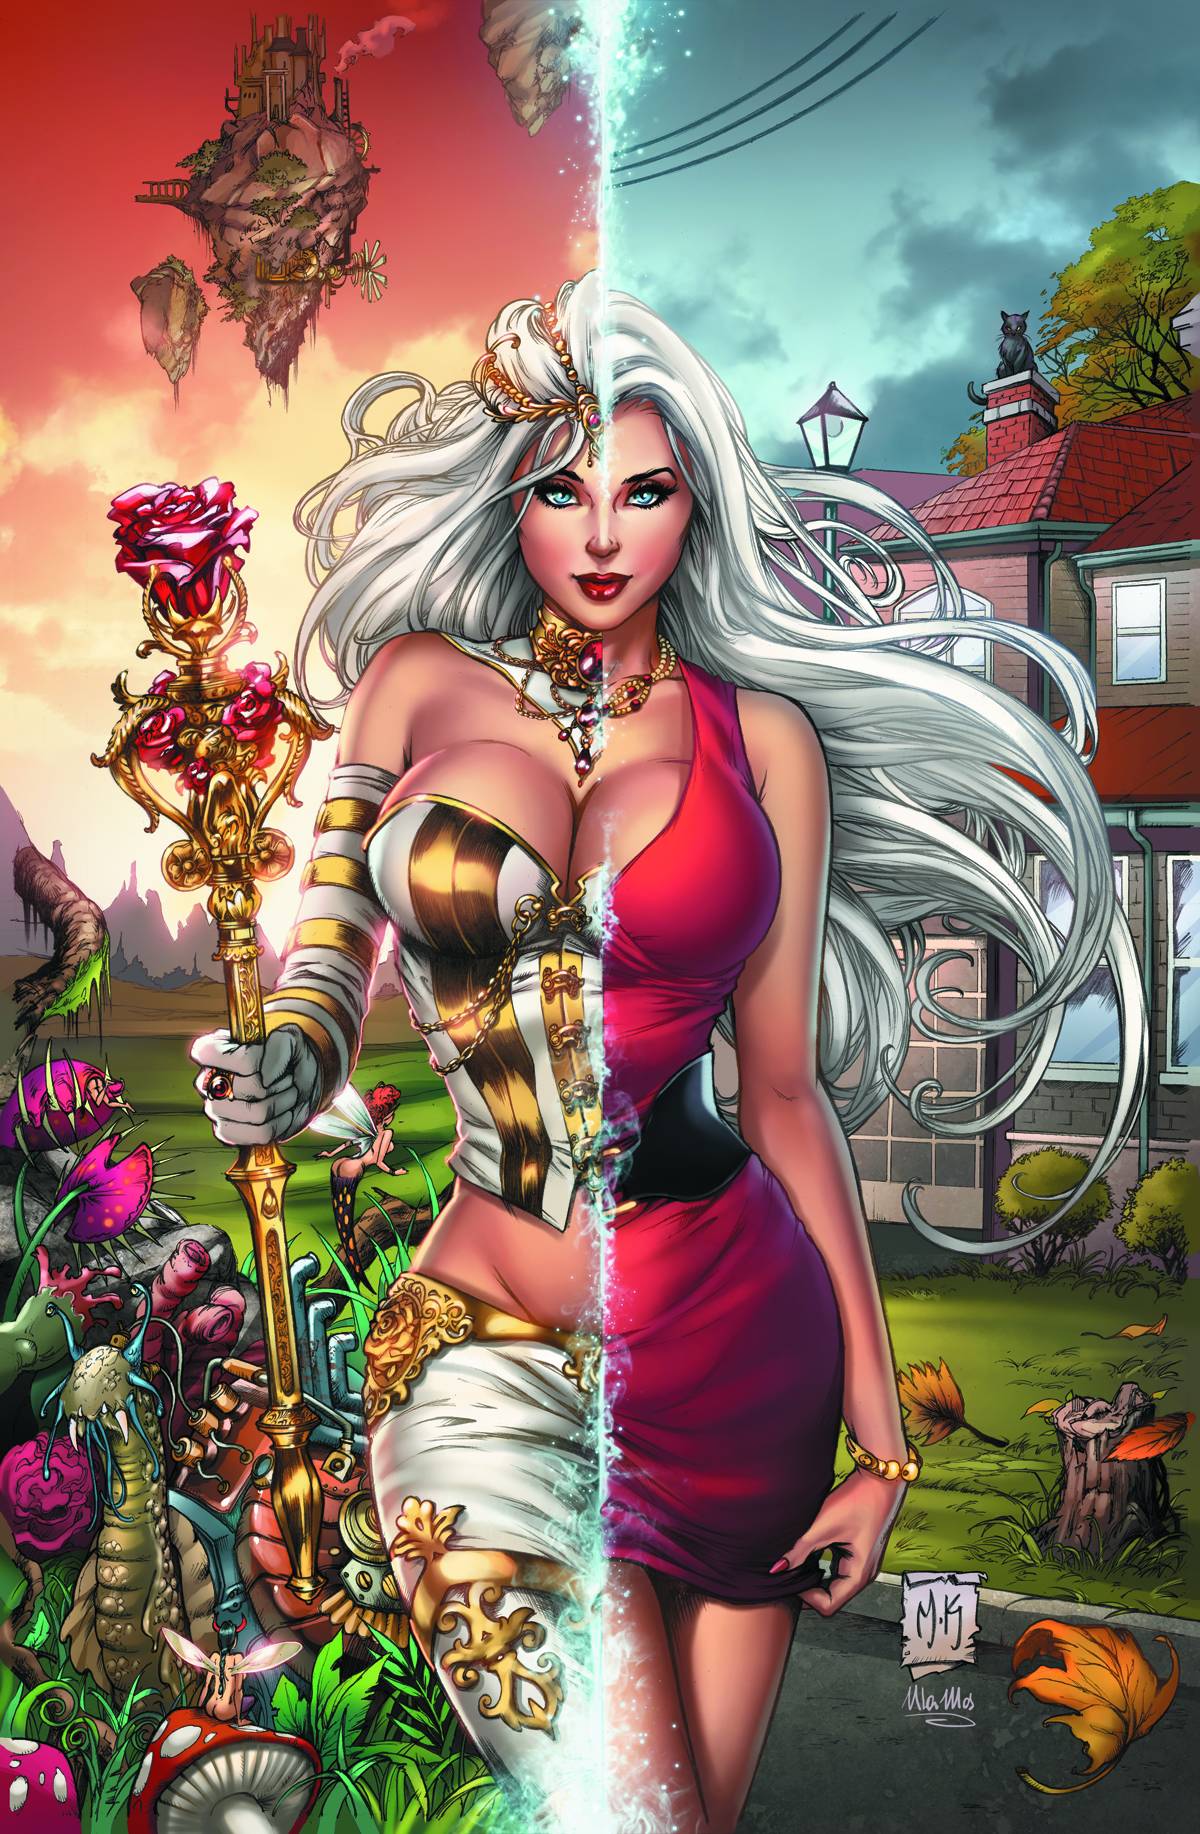 Grimm Fairy Tales Wonderland #12 A Cover Krome Red Dress